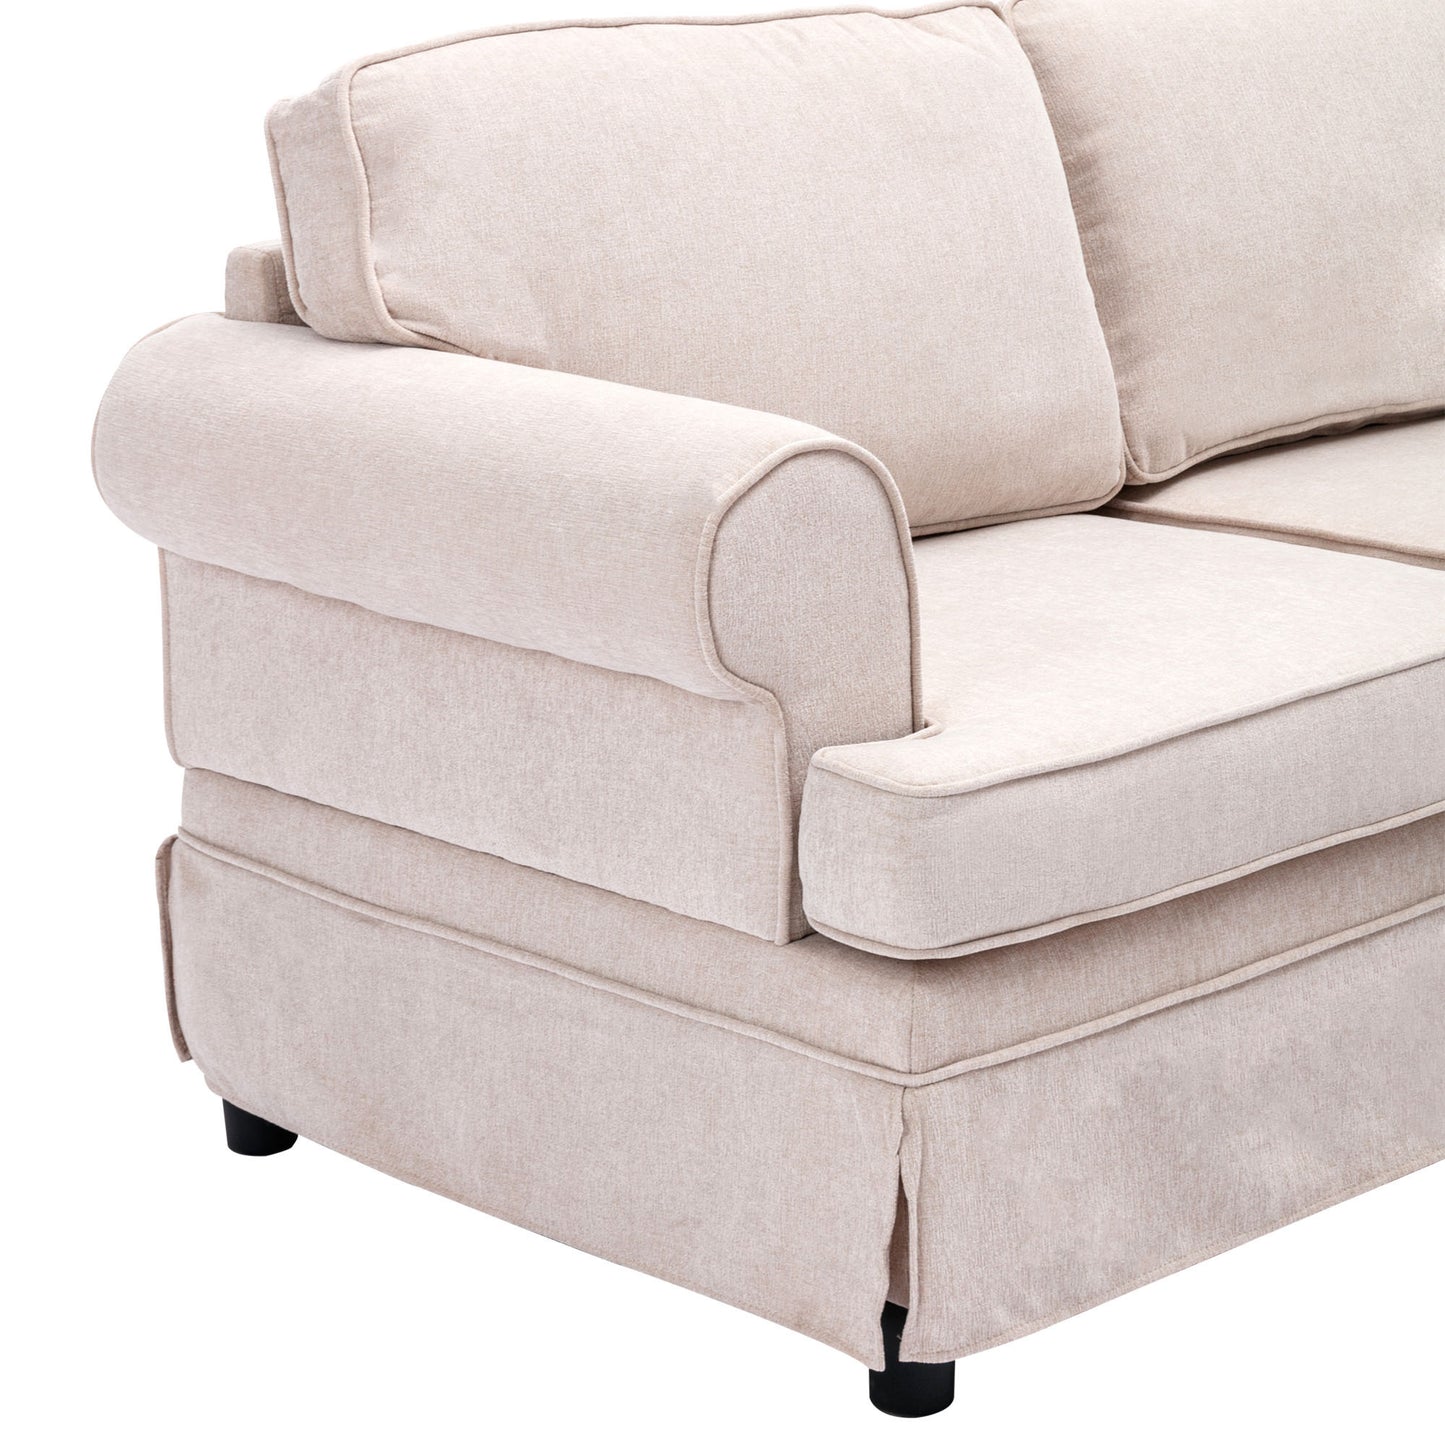 Modular Beige Sectional Sofa Collection with Removable Ottoman